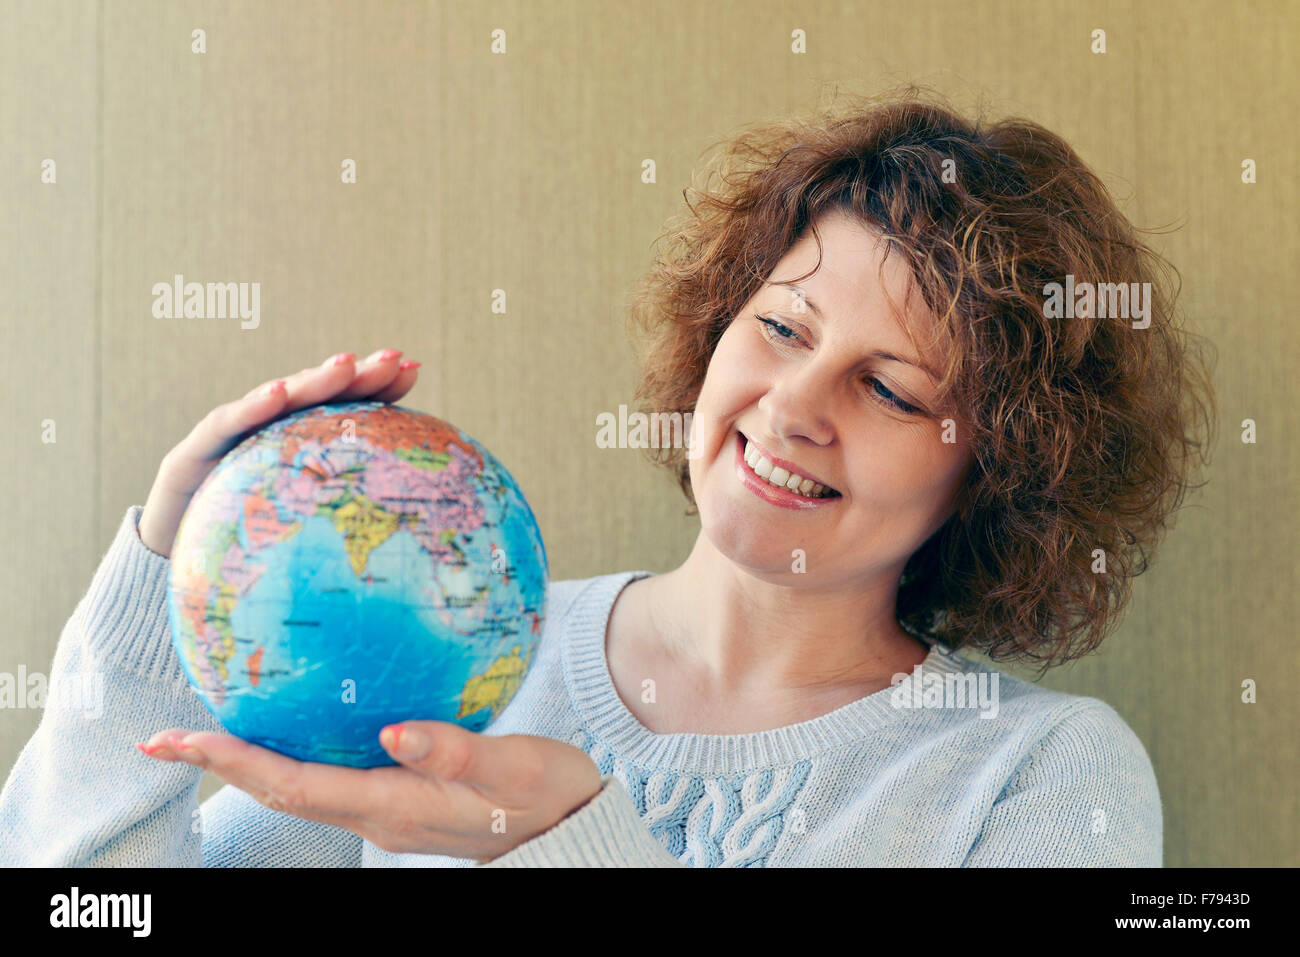 Woman with globe in hands thinking about traveling Stock Photo